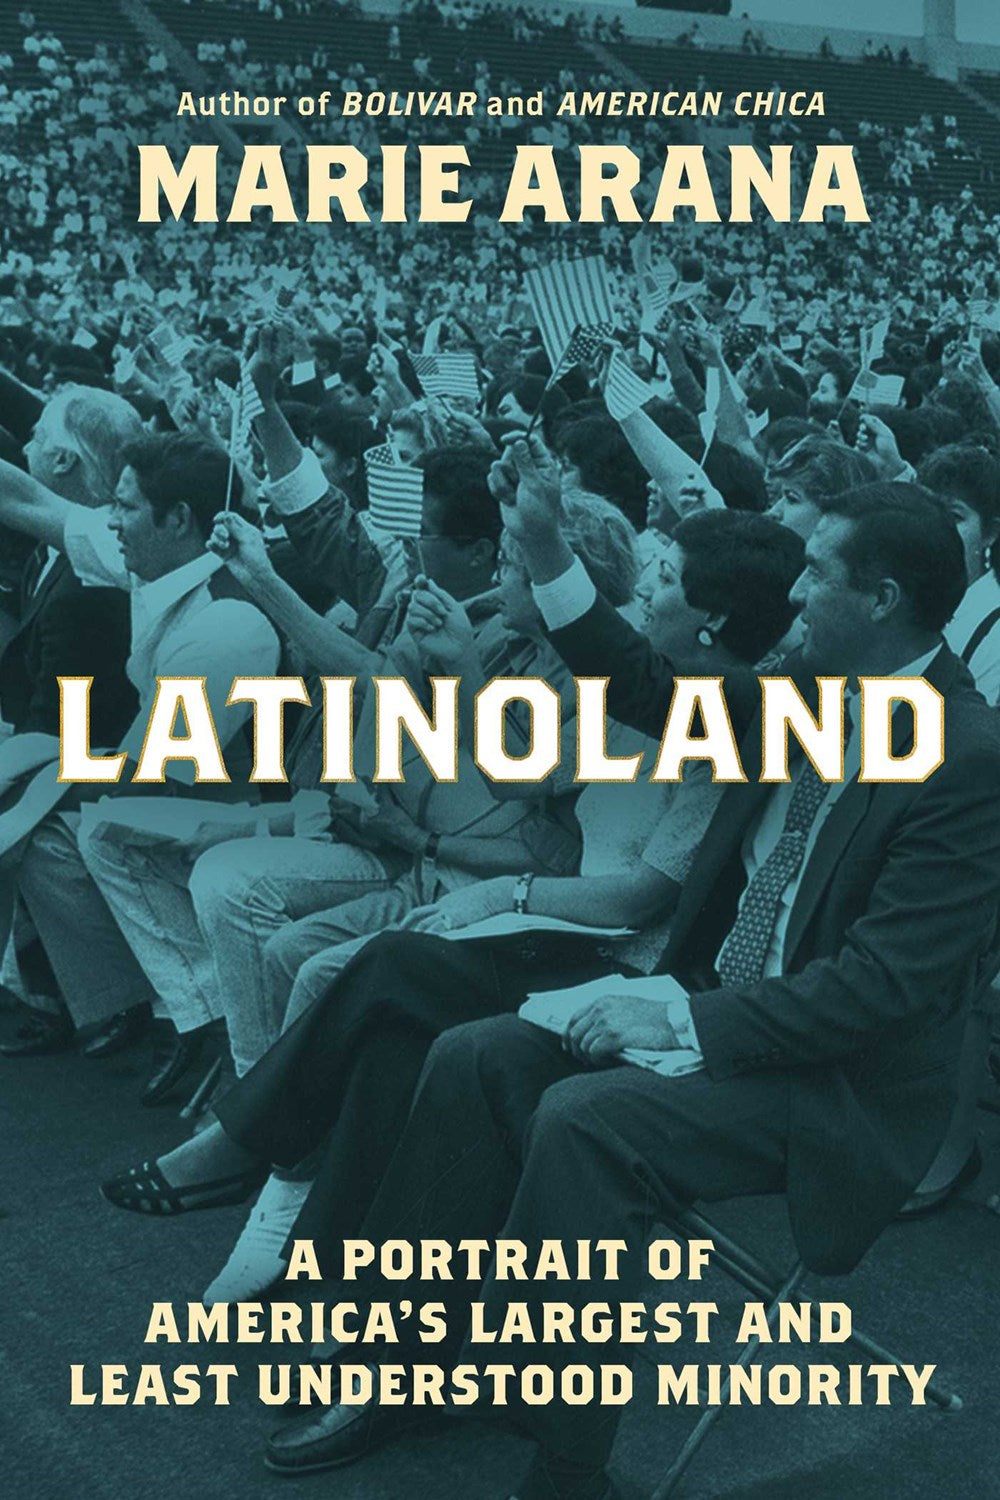 PRE-ORDER: LatinoLand: A Portrait of America's Largest and Least Understood Minority